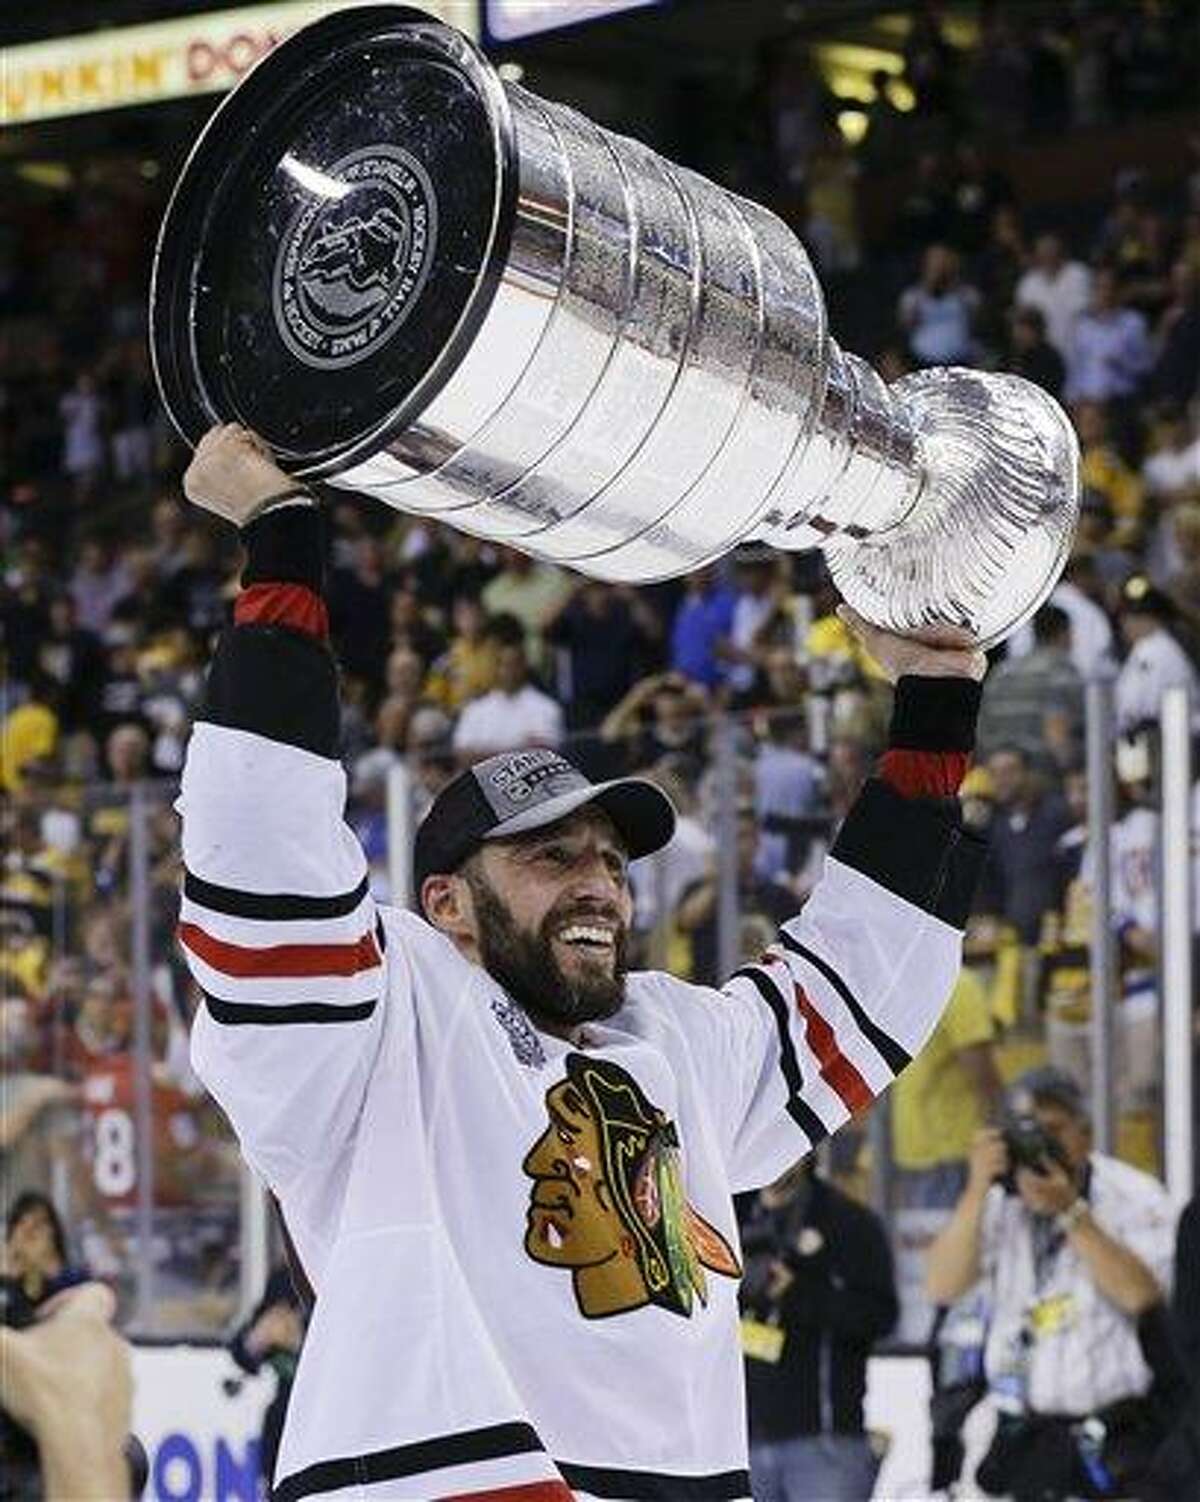 Chicago Blackhawks defenseman Michal Rozsival, of the Czech Republic, hoists the Stanley Cup after the Blackhawks beat the Boston Bruins 3-2 in Game 6 of the NHL hockey Stanley Cup Finals Monday, June 24, 2013, in Boston. (AP Photo/Elise Amendola)